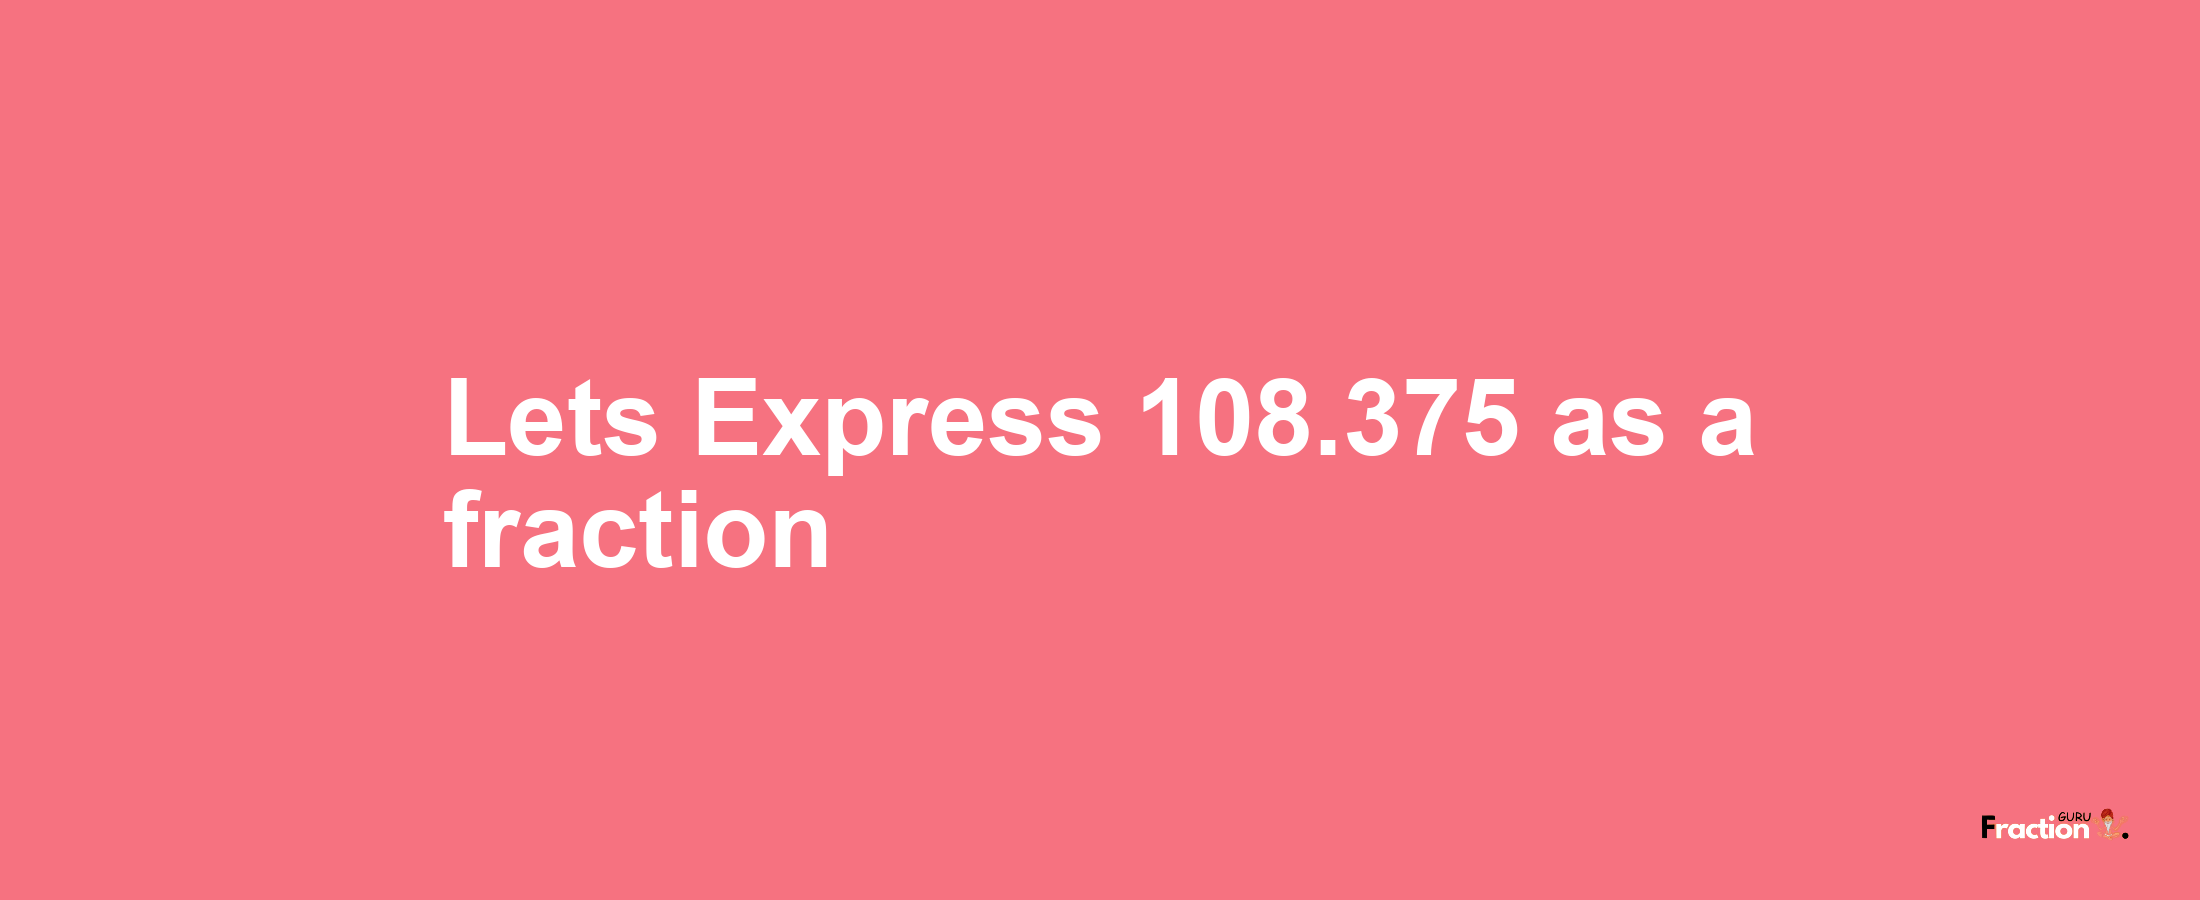 Lets Express 108.375 as afraction